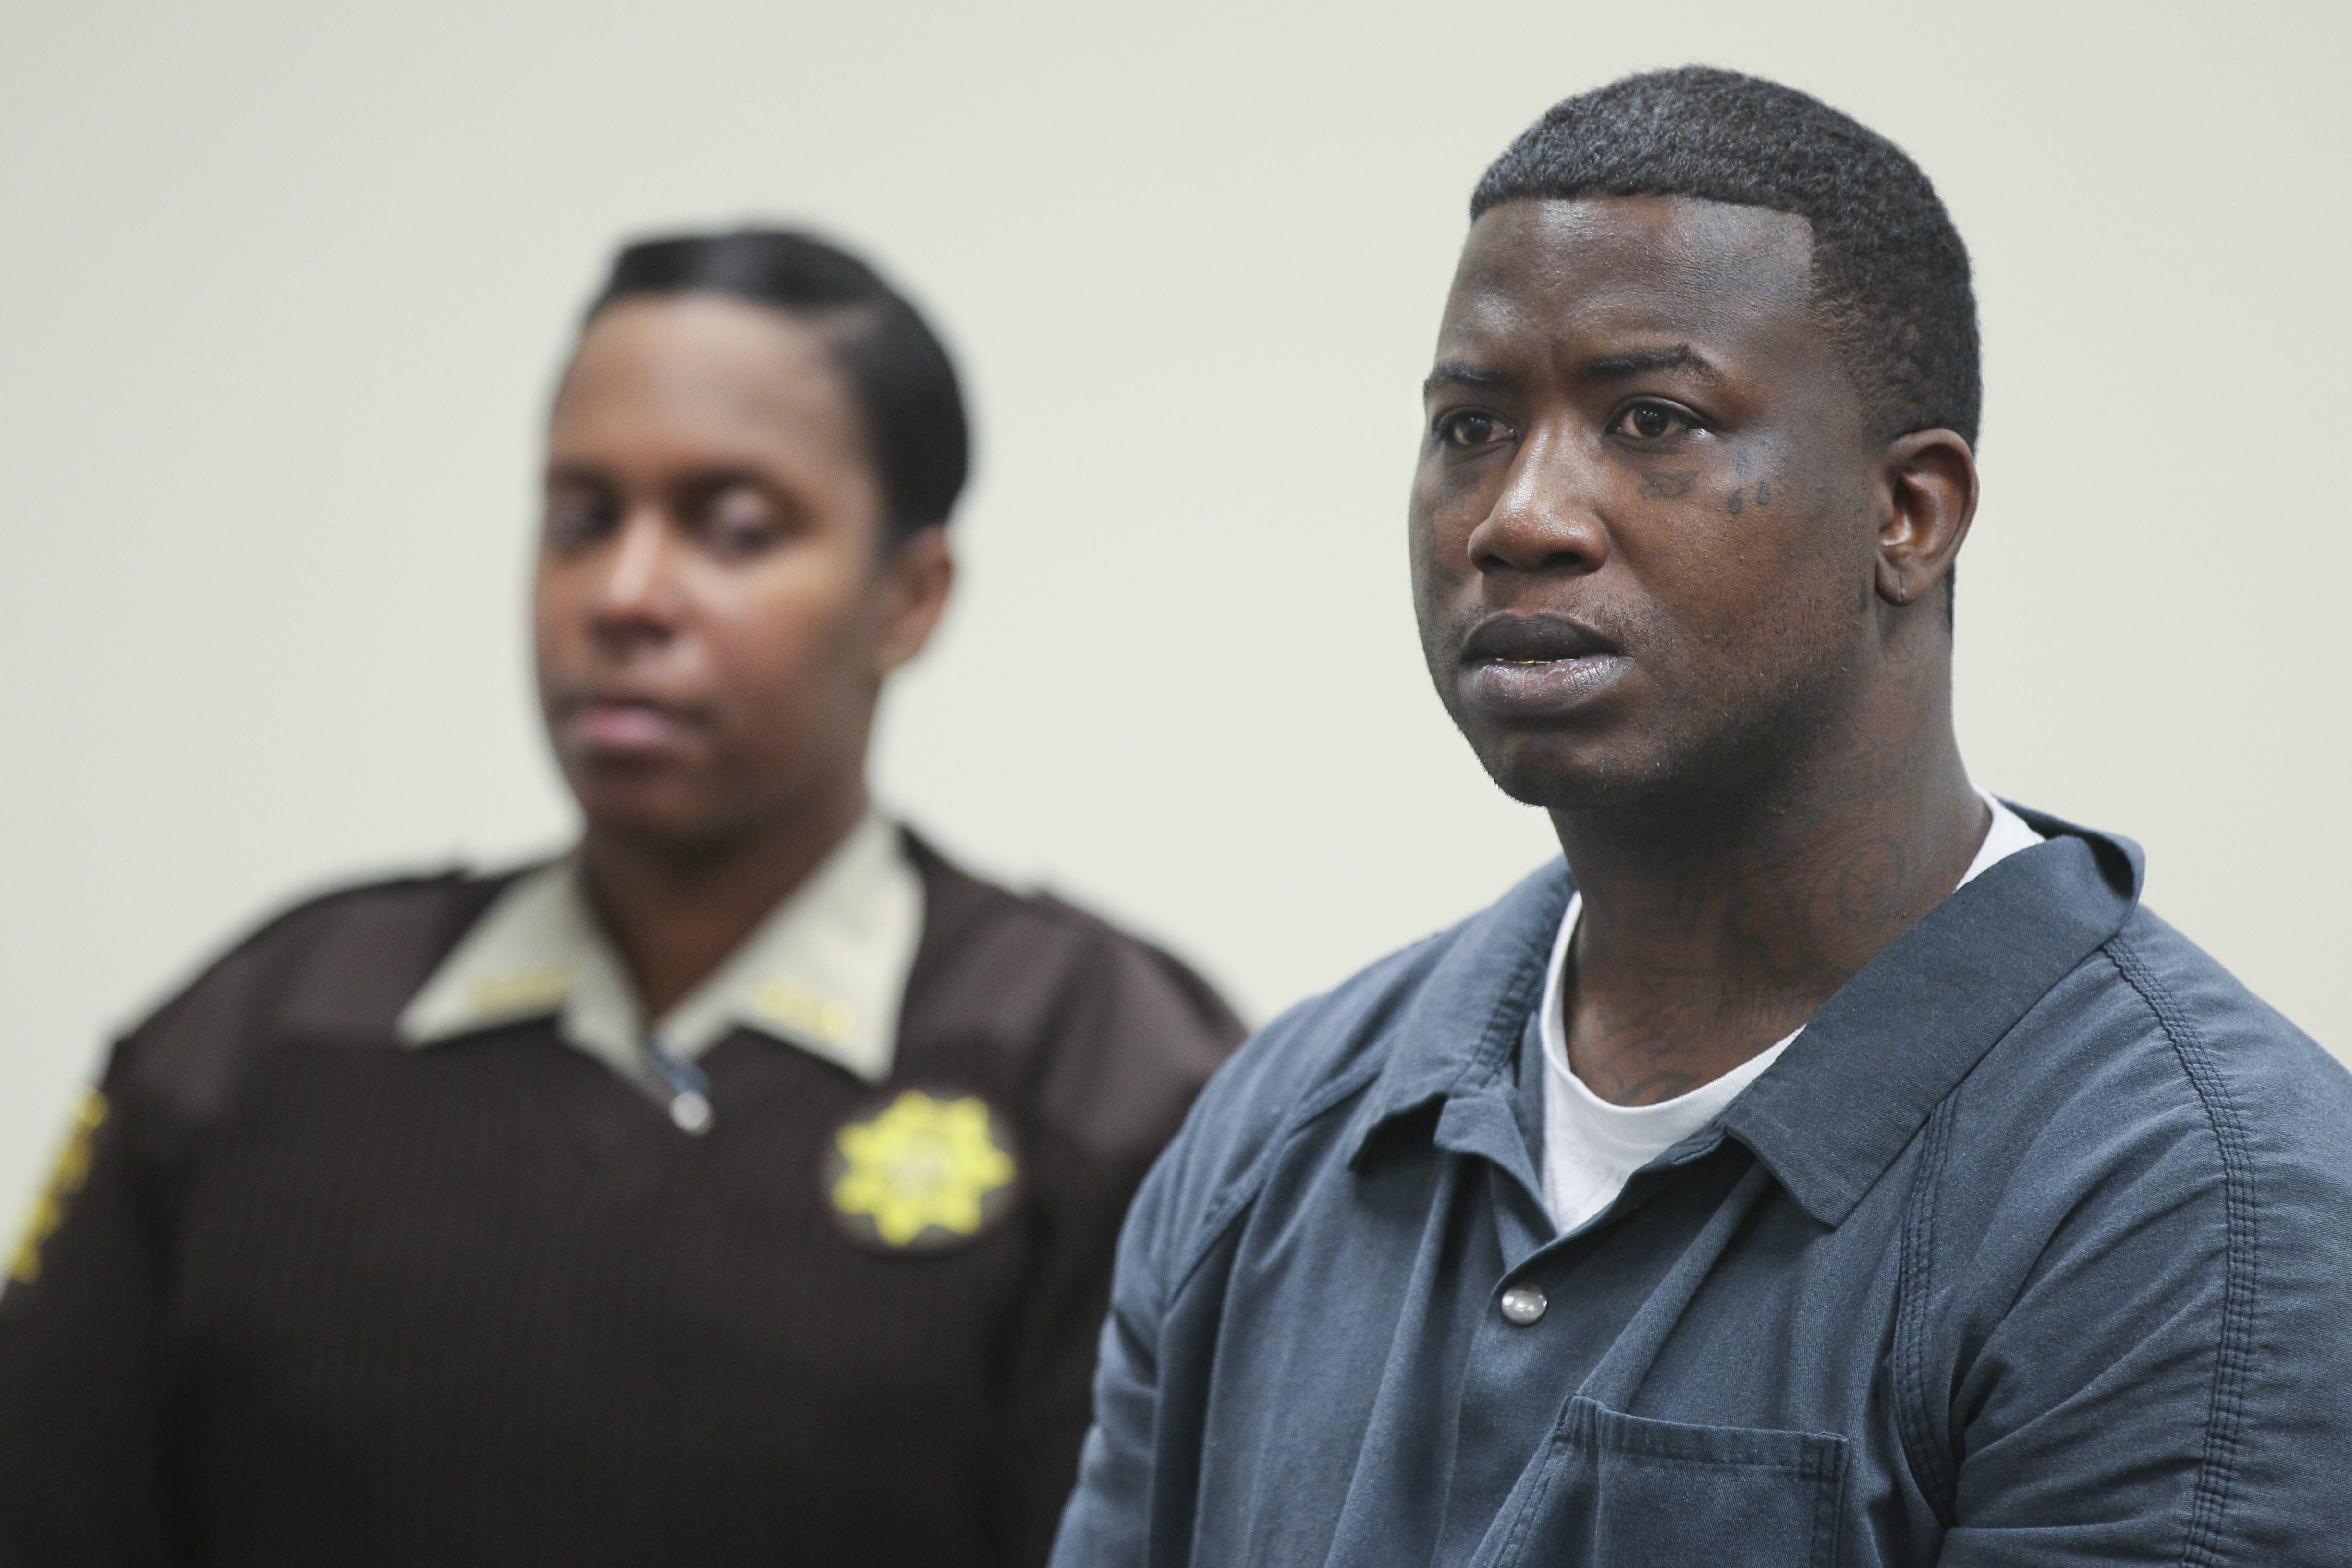 Mar. 27, 2013 Atlanta: Fulton County Sheriff deputy T. Reynolds (left) looks on as defendant Radric Davis (right) listens. Rapper Gucci Mane was denied bond Wednesday at his first court appearance after his arrest for allegedly assaulting a soldier earlier this month at an Atlanta nightclub. His next court date is April 10. The musician, whose real name is Radric Davis, was booked into the Fulton County Jail Tuesday, charged with aggravated assault with a weapon, according to online jail records. Fulton County sheriff’s spokeswoman Tracy Flanagan said Davis turned himself in at the jail about 11:30 p.m. Tuesday, and will face a magistrate for a first appearance at 11 a.m. Wednesday. Channel 2 Action News reported last week that Atlanta police had issued a warrant for the rapper following the March 16 incident at the Harlem Nights club on Courtland Street. The alleged victim told Channel 2 that Davis hit him in the head with a champagne bottle after he asked to take a photo with the rapper. “I’m in the military. I wanted to get a picture with Gucci Mane, is it okay?” the soldier said he asked a security guard. “I was speaking to the security guard, and Gucci Mane hit me in the head with a bottle,” the solder told Channel 2. The soldier told the station that he went to Grady Memorial Hospital by ambulance, and his injury required 10 stitches. JOHN SPINK / JSPINK@AJC.COM